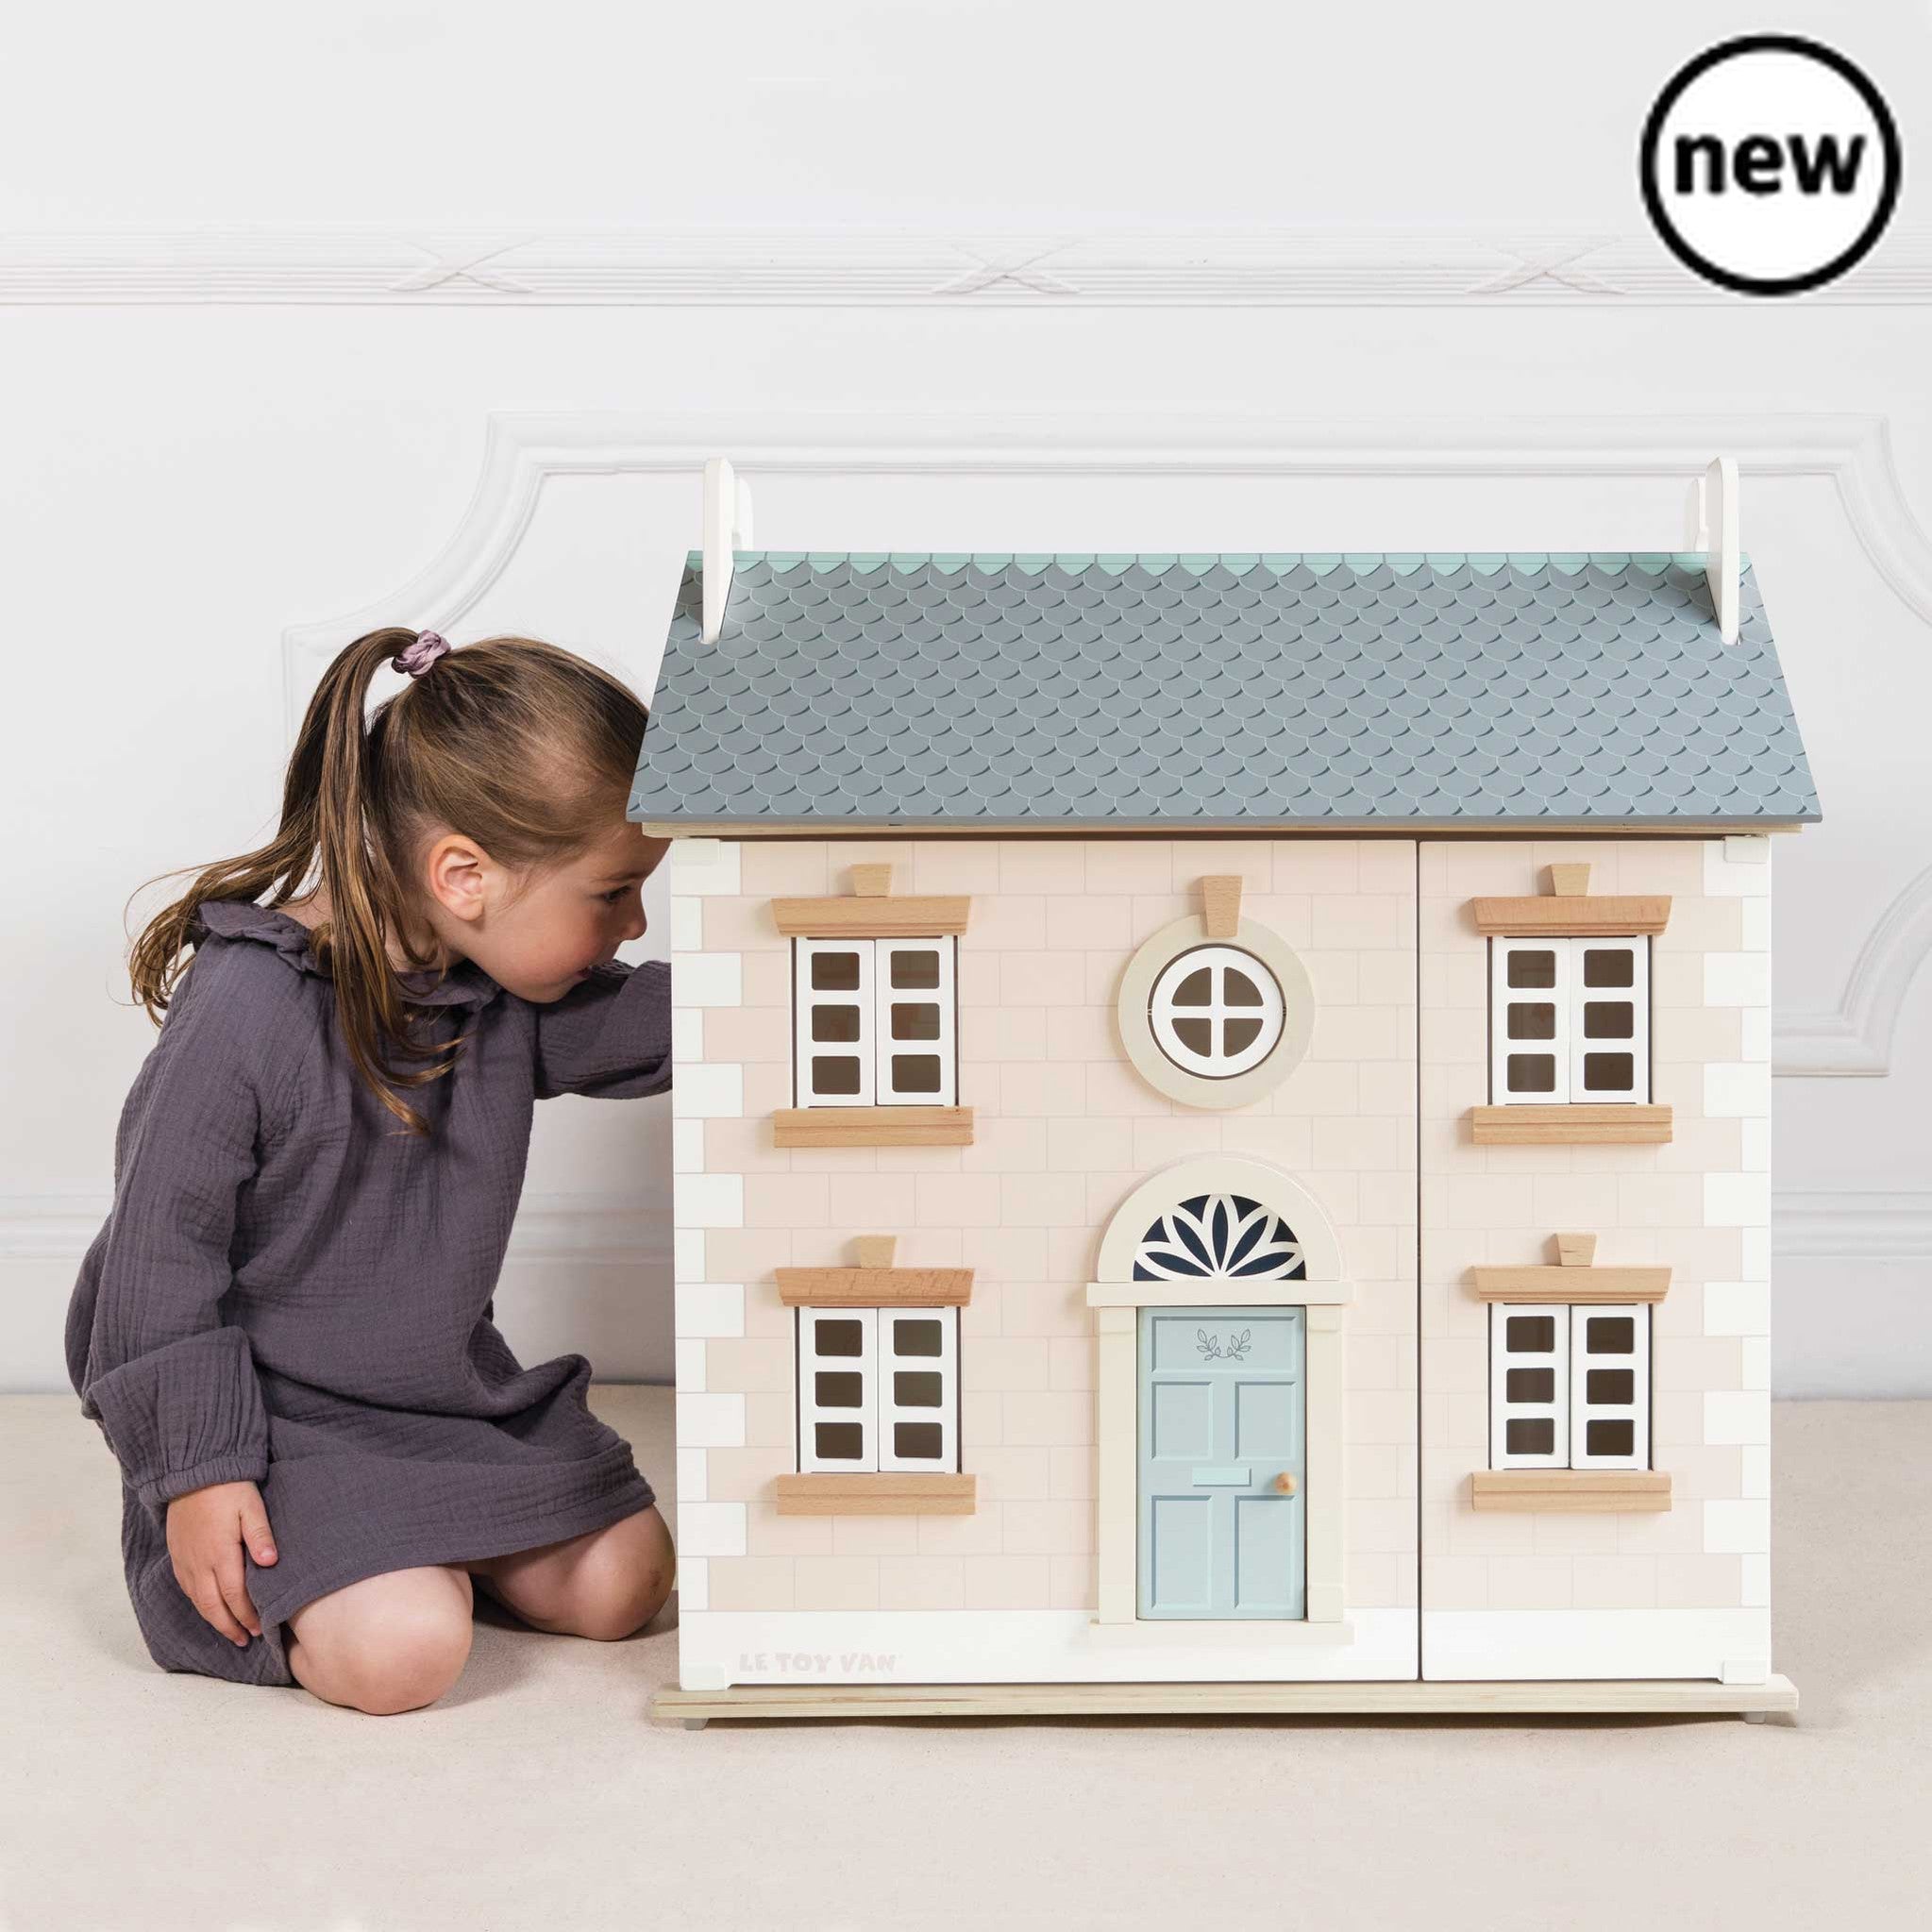 Bay Tree Dolls House, Childhood dreams really do come true with the beautiful Bay Tree Wooden Dolls House. Inspire small world play with this one of a kind, timeless toy. Made from sustainable FSC™- certified wood and painted in pretty pastel pink, white and grey hues using non-toxic water based paints, this deluxe 3 storey home is fully decorated inside and out. Featuring opening and closing shutters and doors, natural wood floors throughout, a lovely wooden staircase to the first floor and a detailed wall